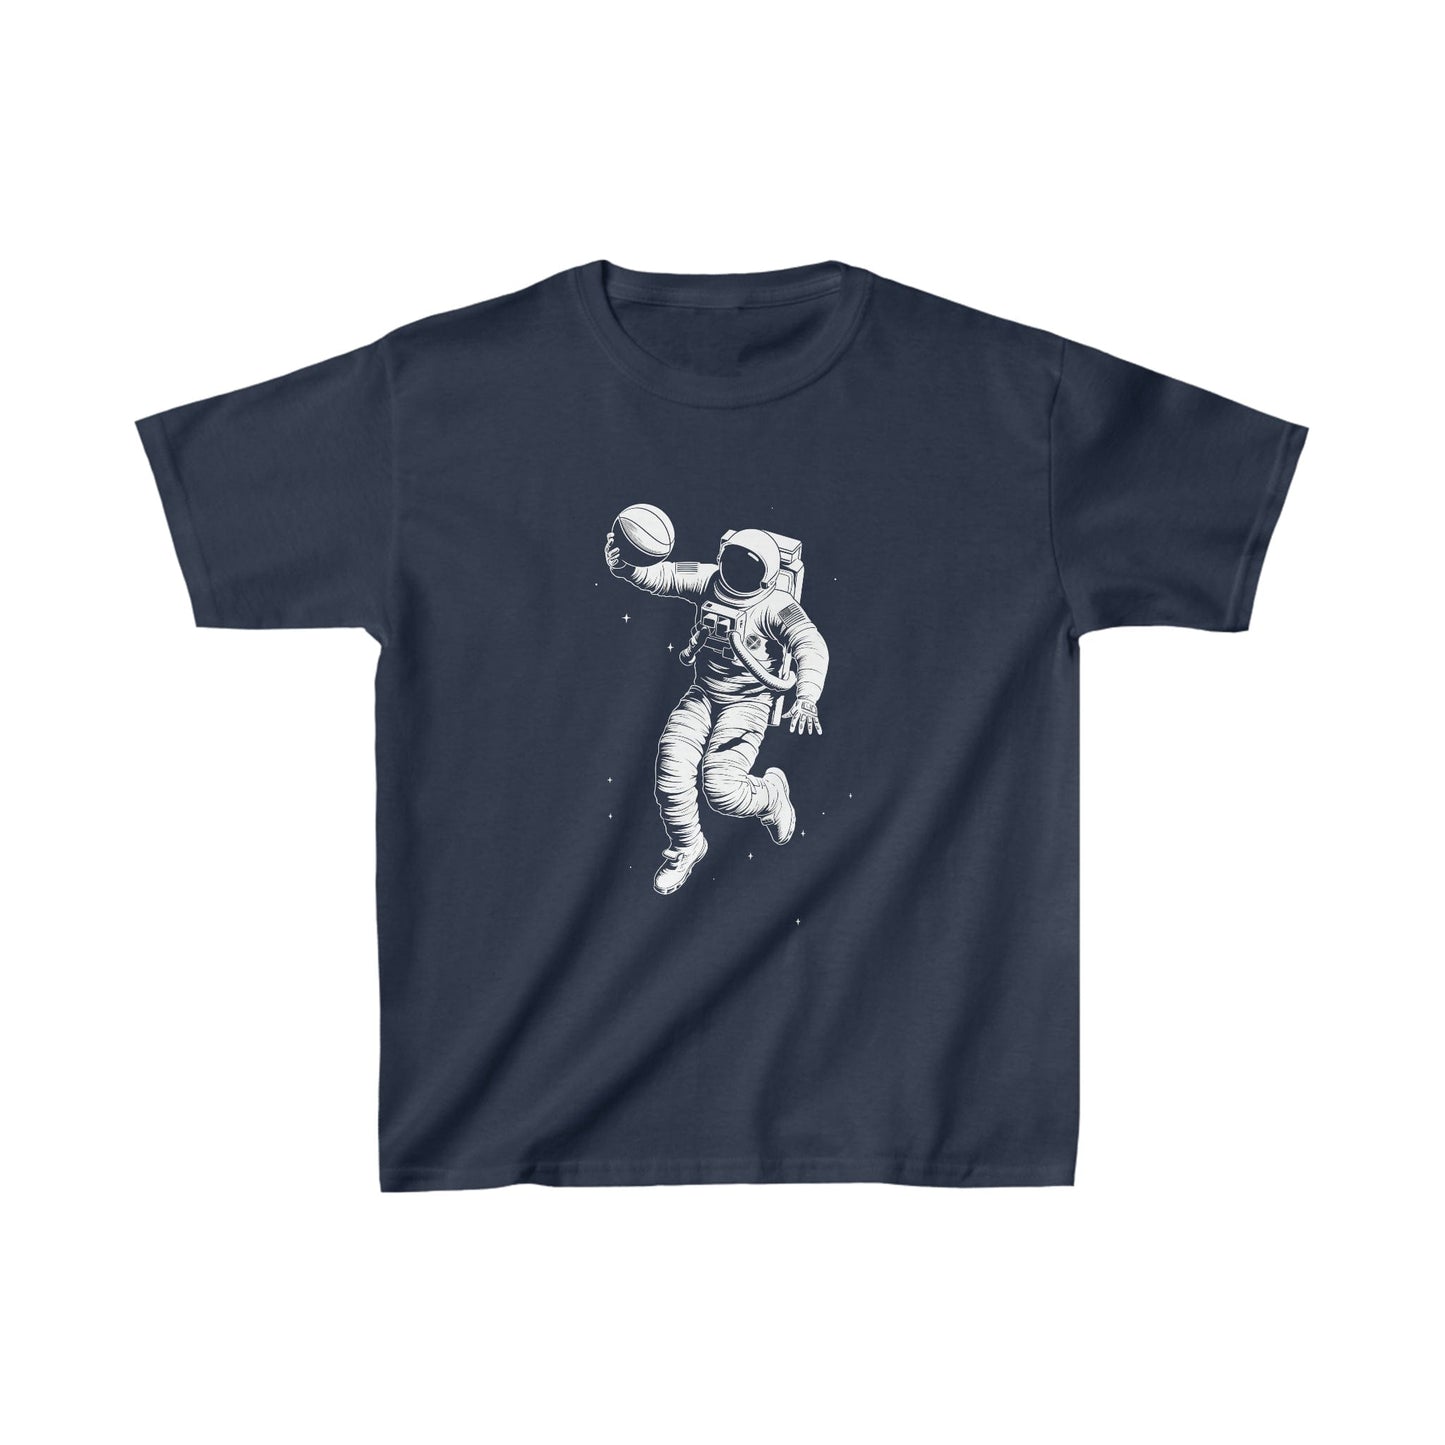 Kids clothes XS / Navy Youth Astronaut Basketball T-Shirt